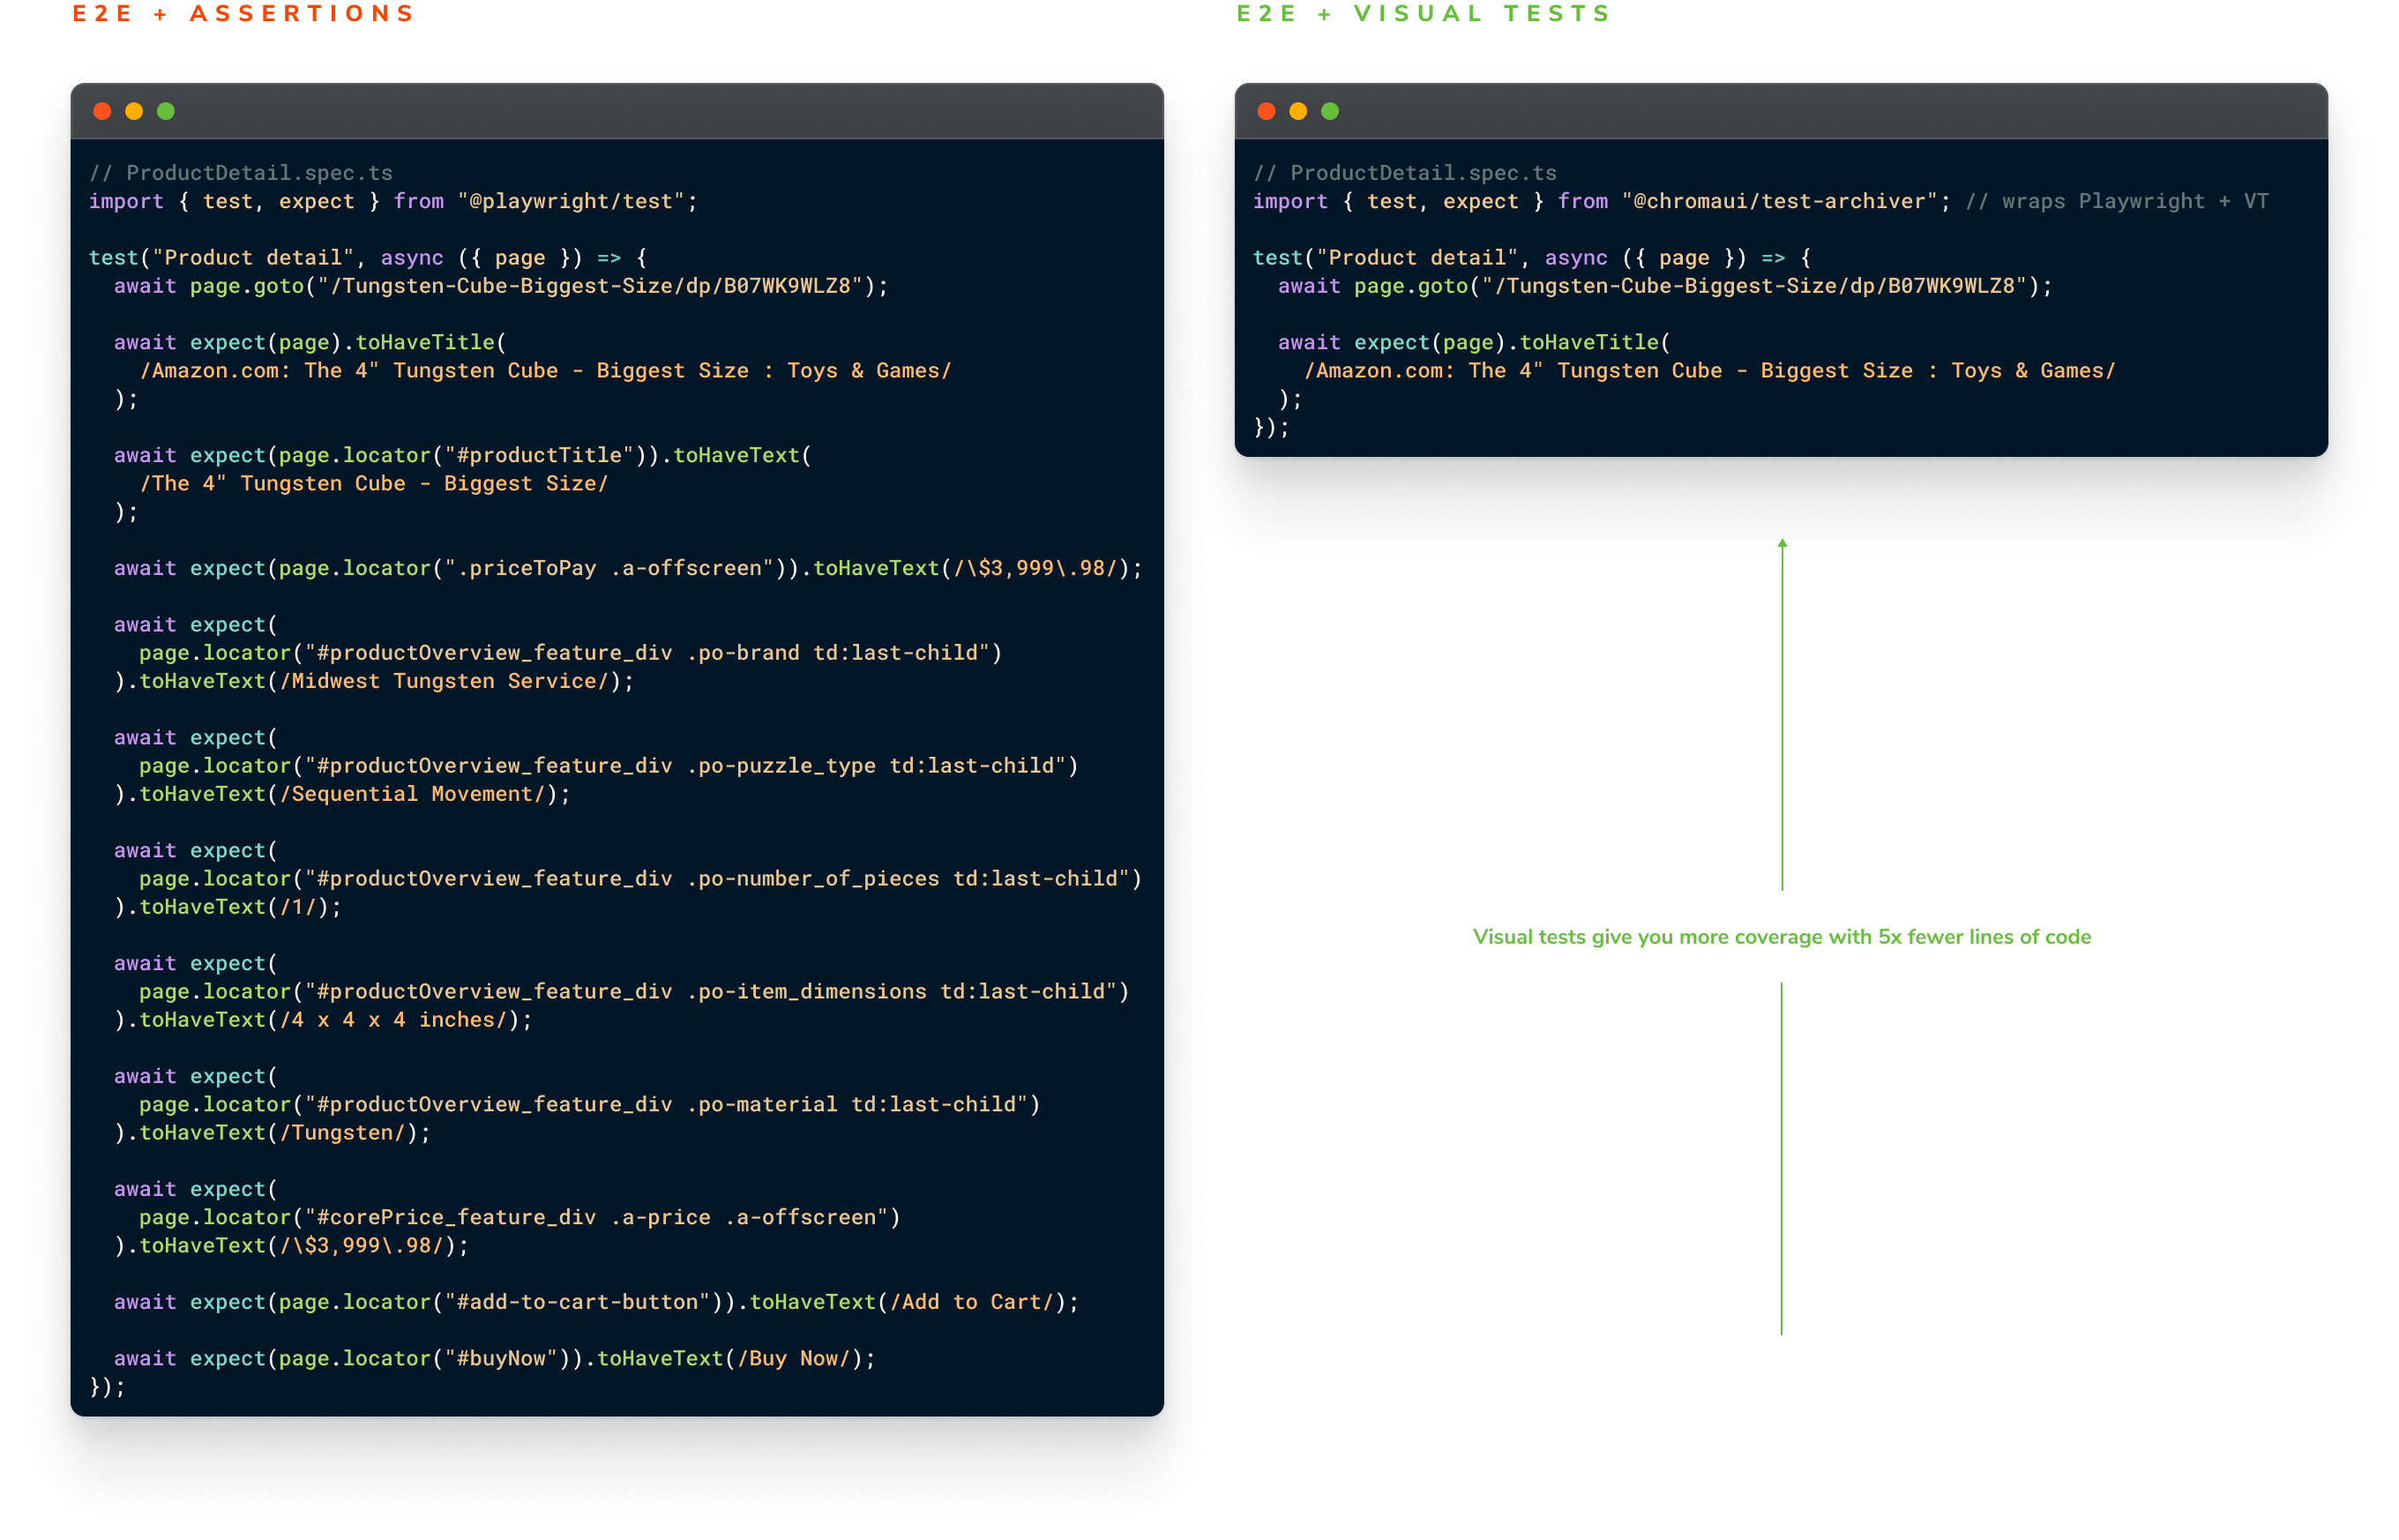 On the left, source code for a traditional E2E test with many assertions for individual pieces of content. On the right, source code for a much shorter E2E test that also serves as a visual test. Under the right-side code, in the empty space is text reading "More coverage with 5x fewer lines of code".